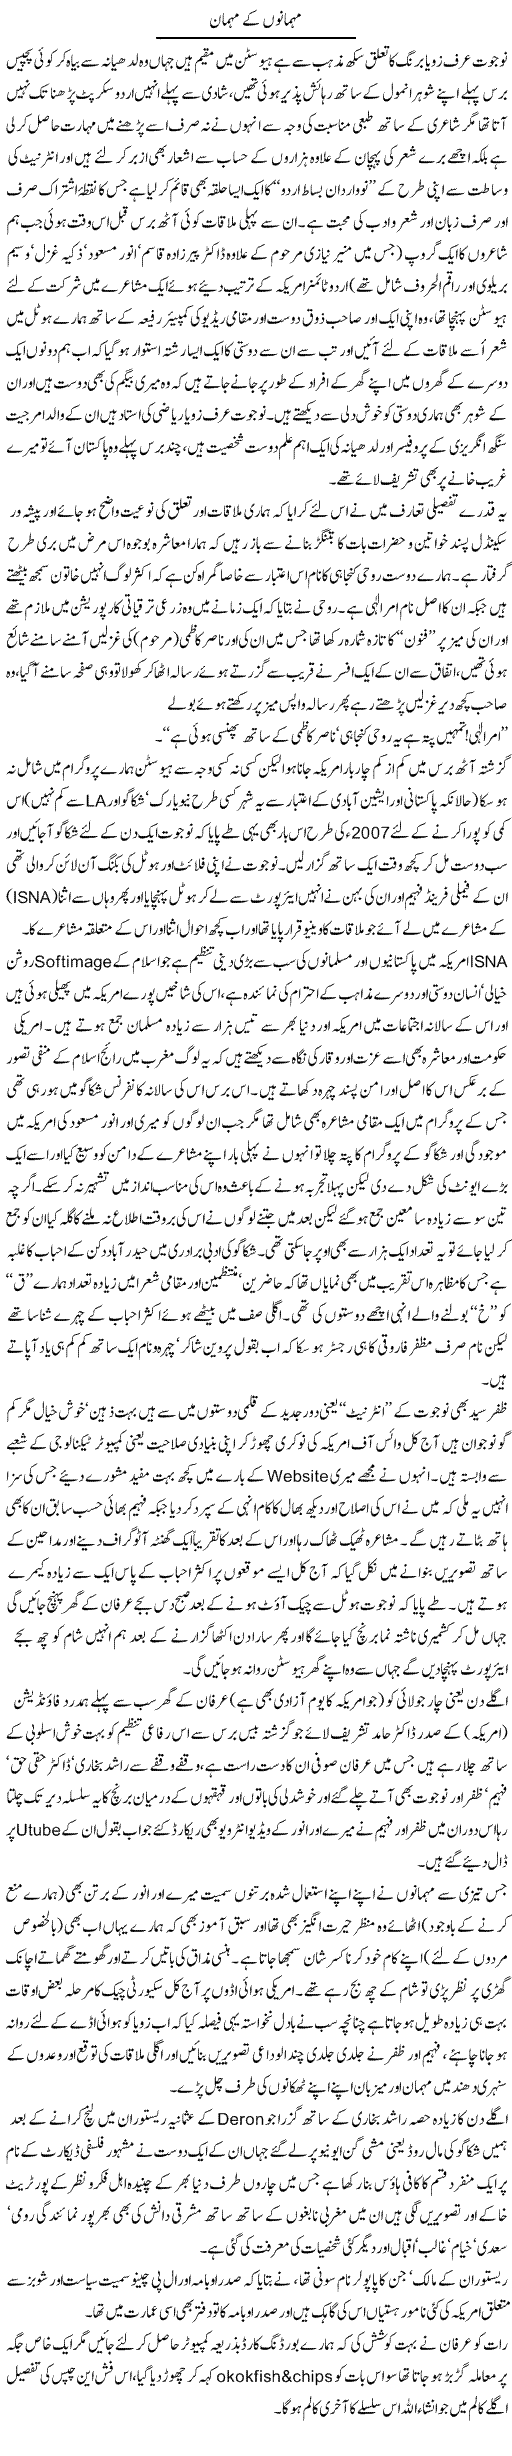 Guests of Guests Express Column Amjad Islam 21 July 2011